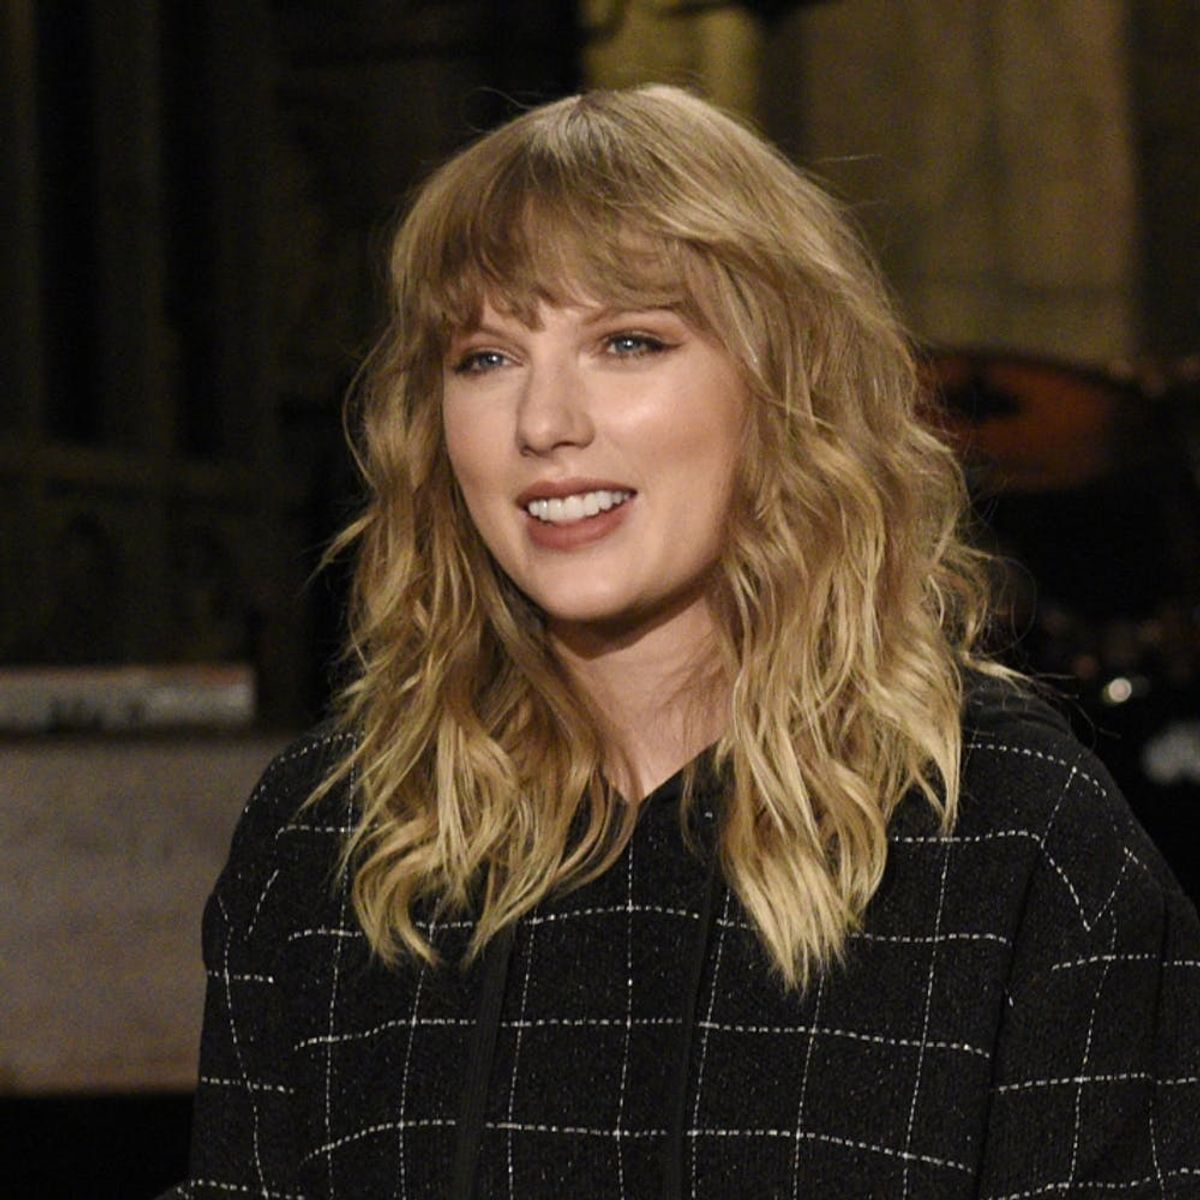 Taylor Swift on Her Decision to Testify Against Her Assailant: “Why Should I Be Polite?”